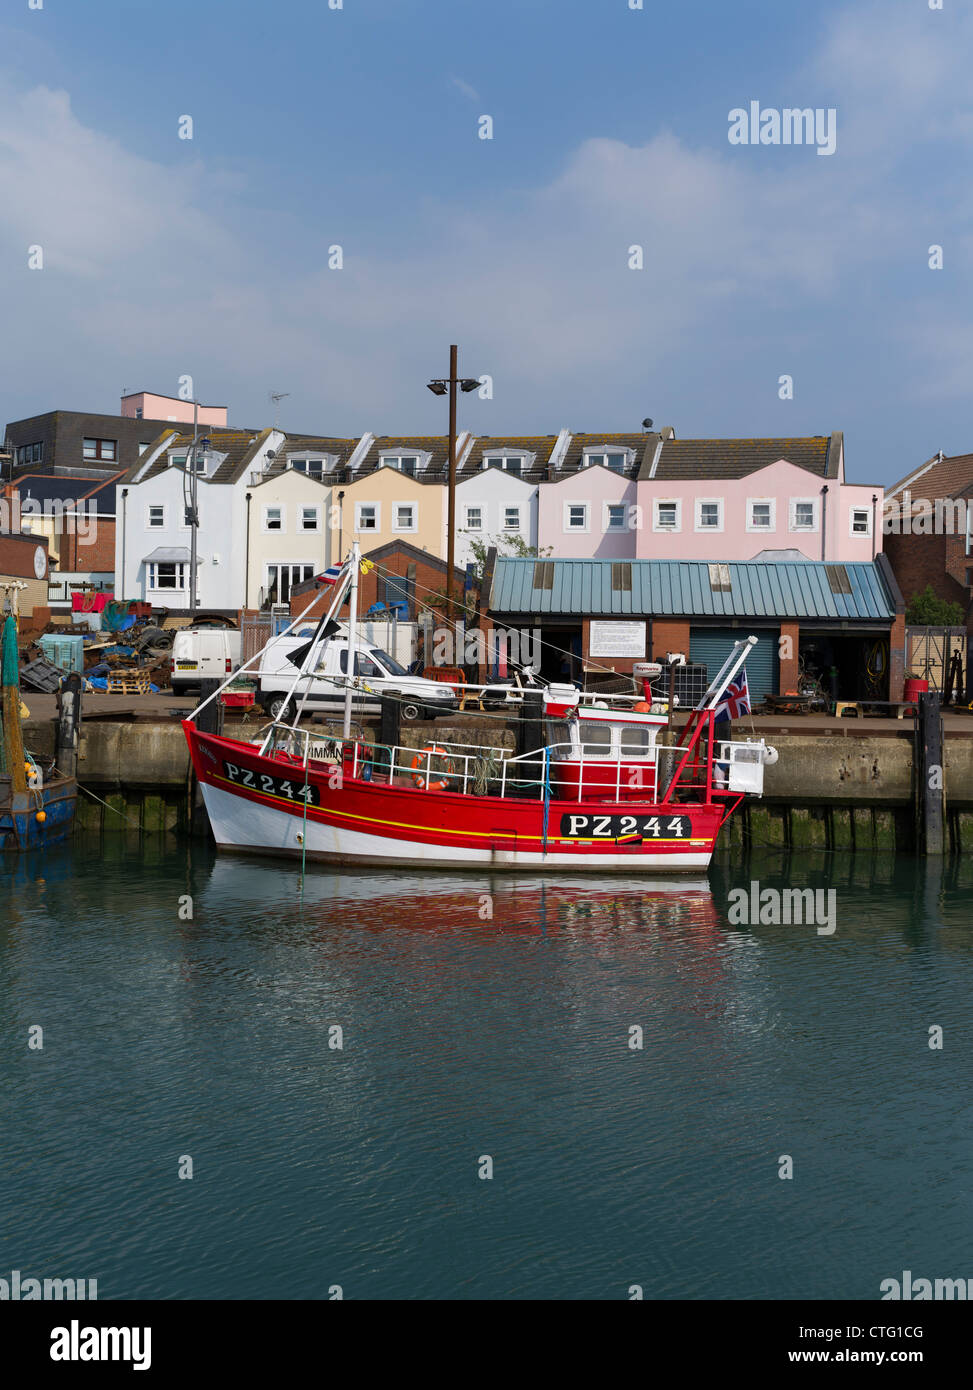 dh Old Portsmouth PORTSMOUTH HAMPSHIRE Fishing boats alongside quay Portsmouth harbour camber docks boat england uk city Stock Photo